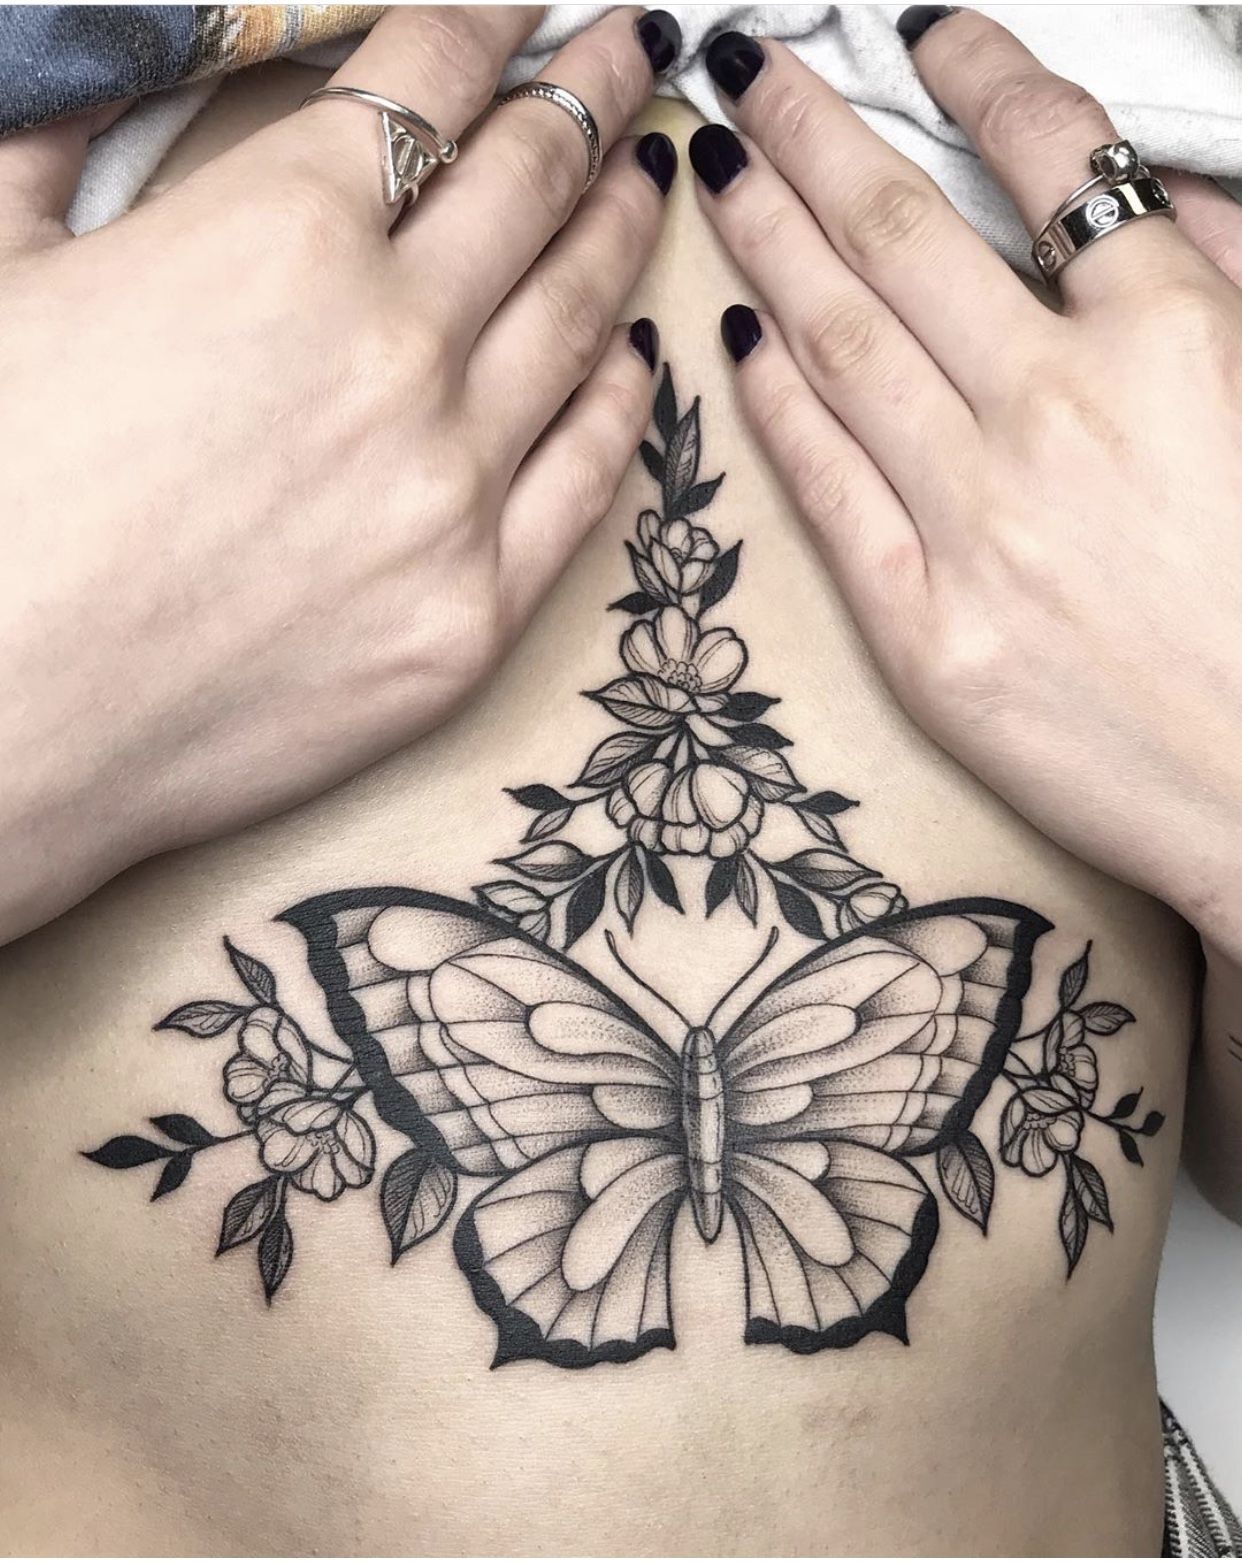 Moth Or Butterfly Sternum Tattoos